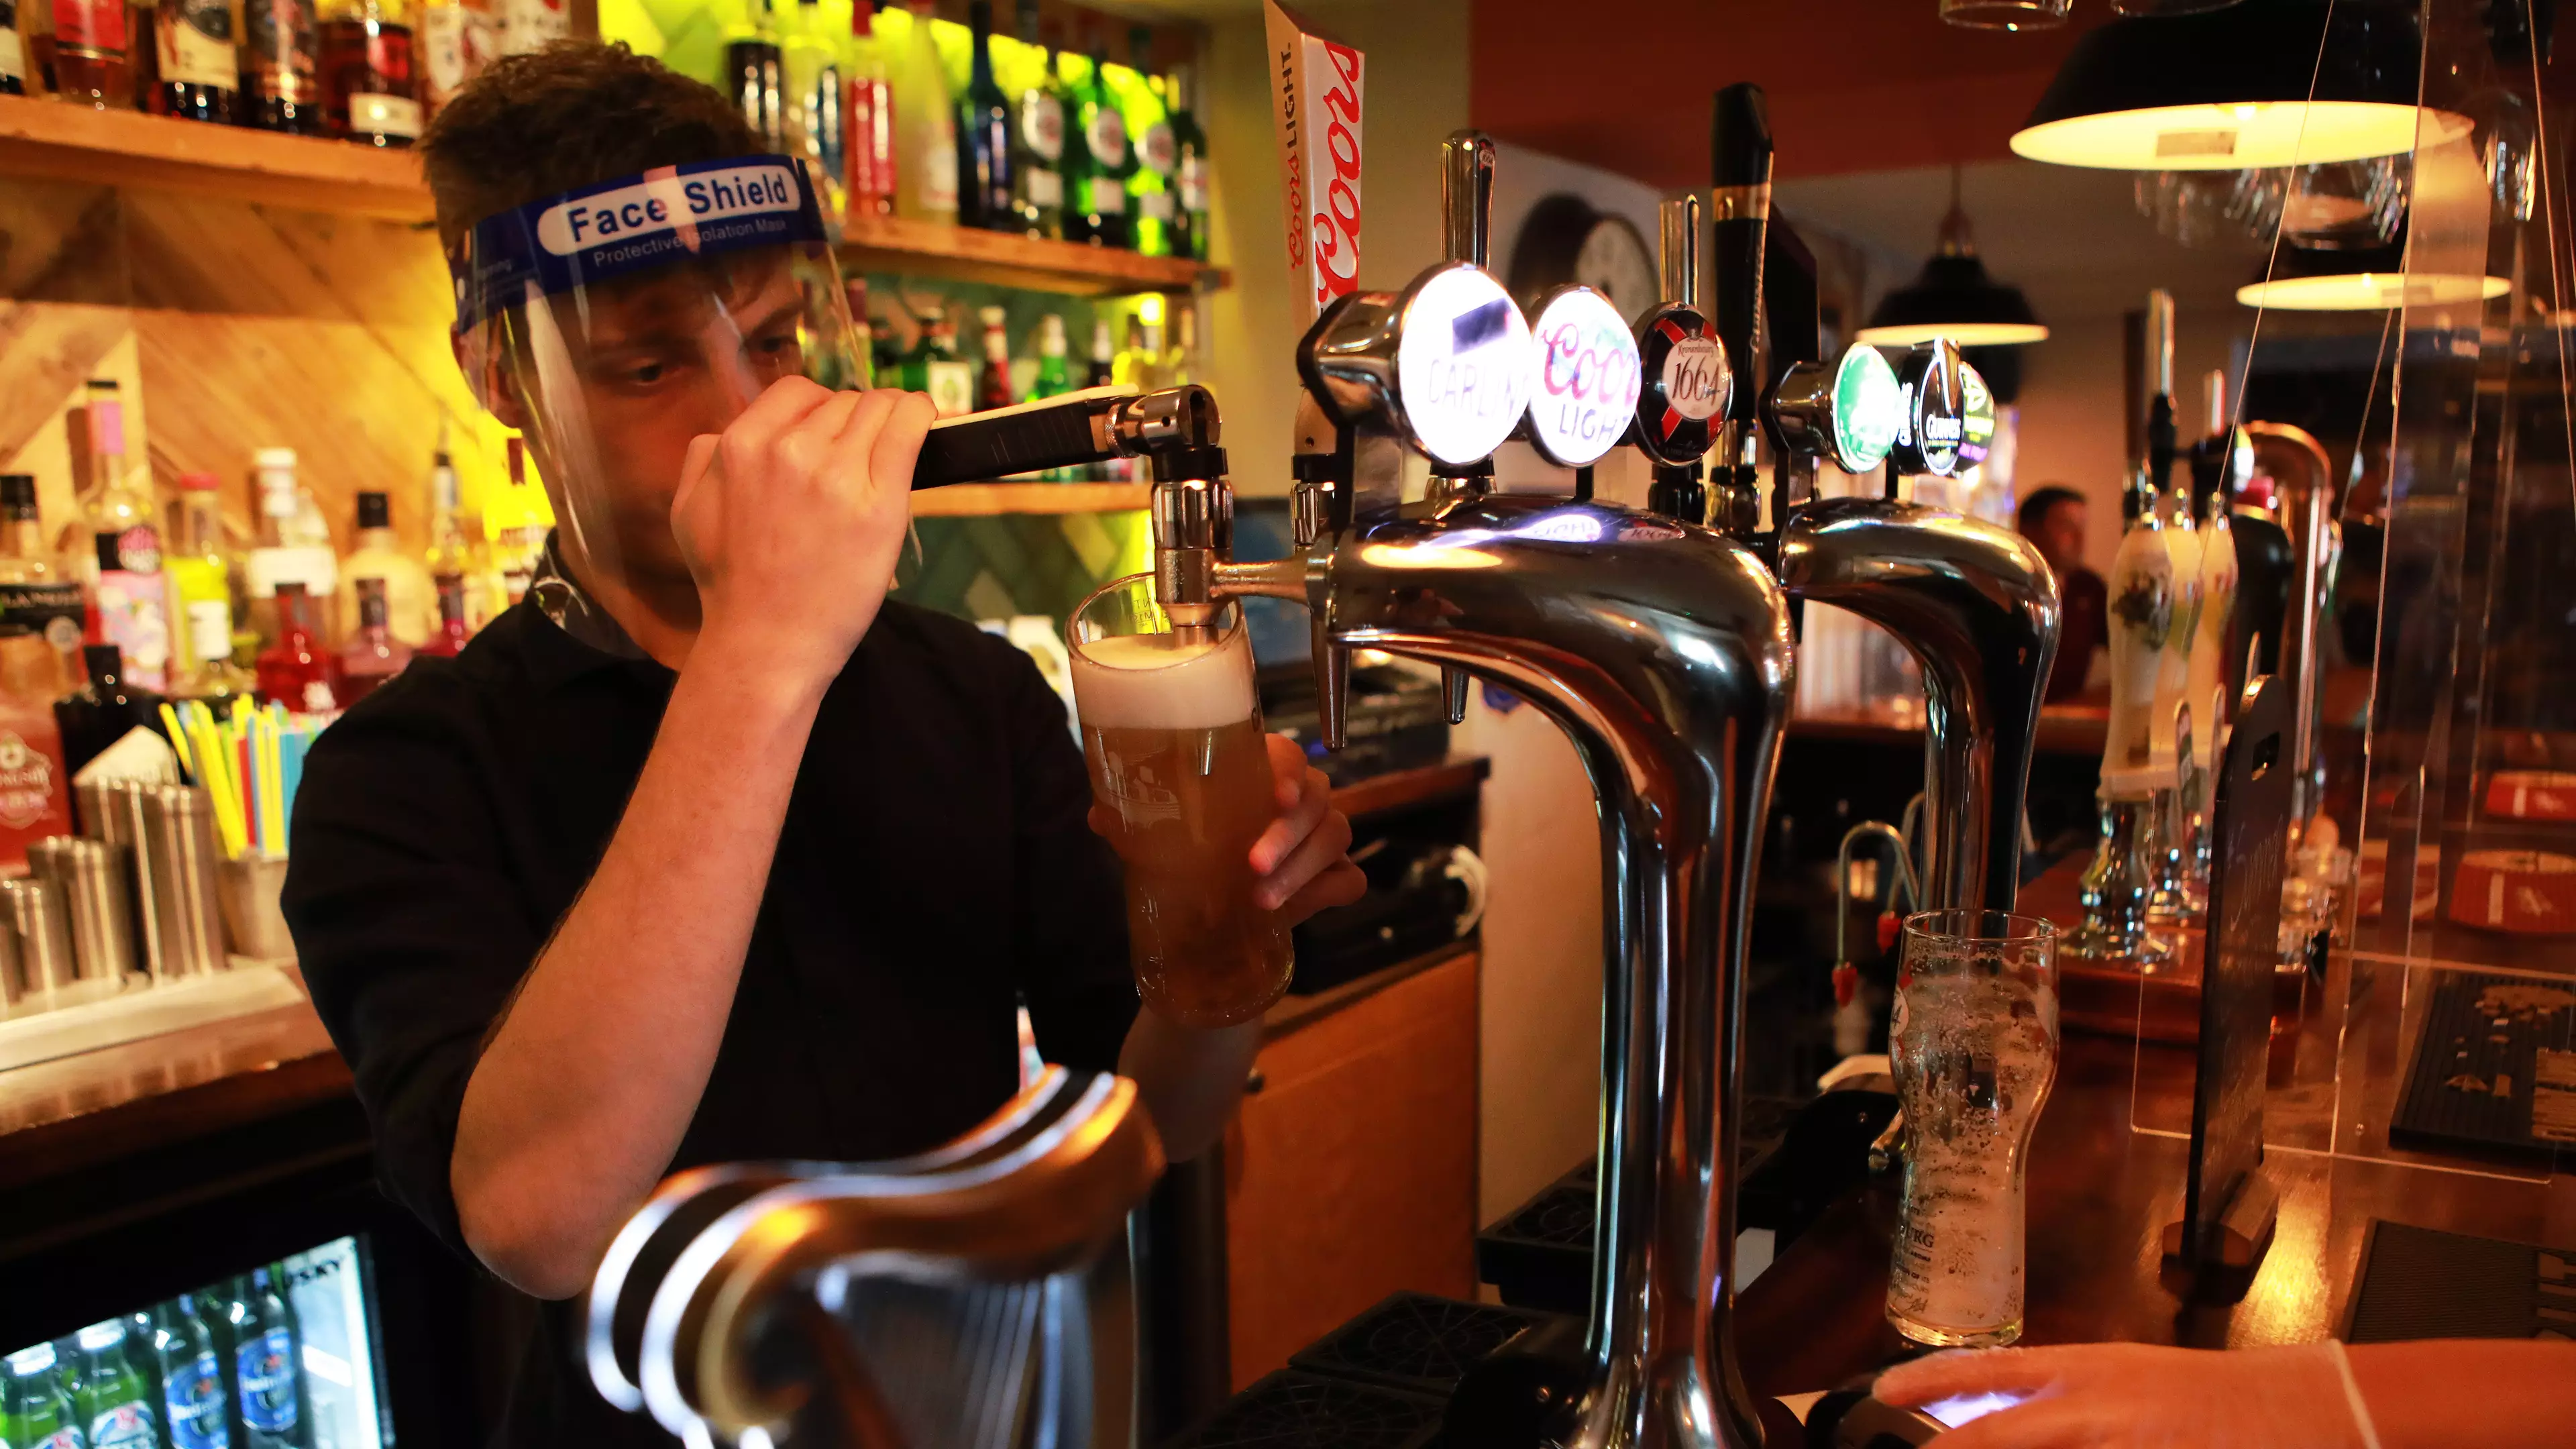 Pubs Are Likely To Stay Closed For Another Three Months, According To Industry Body